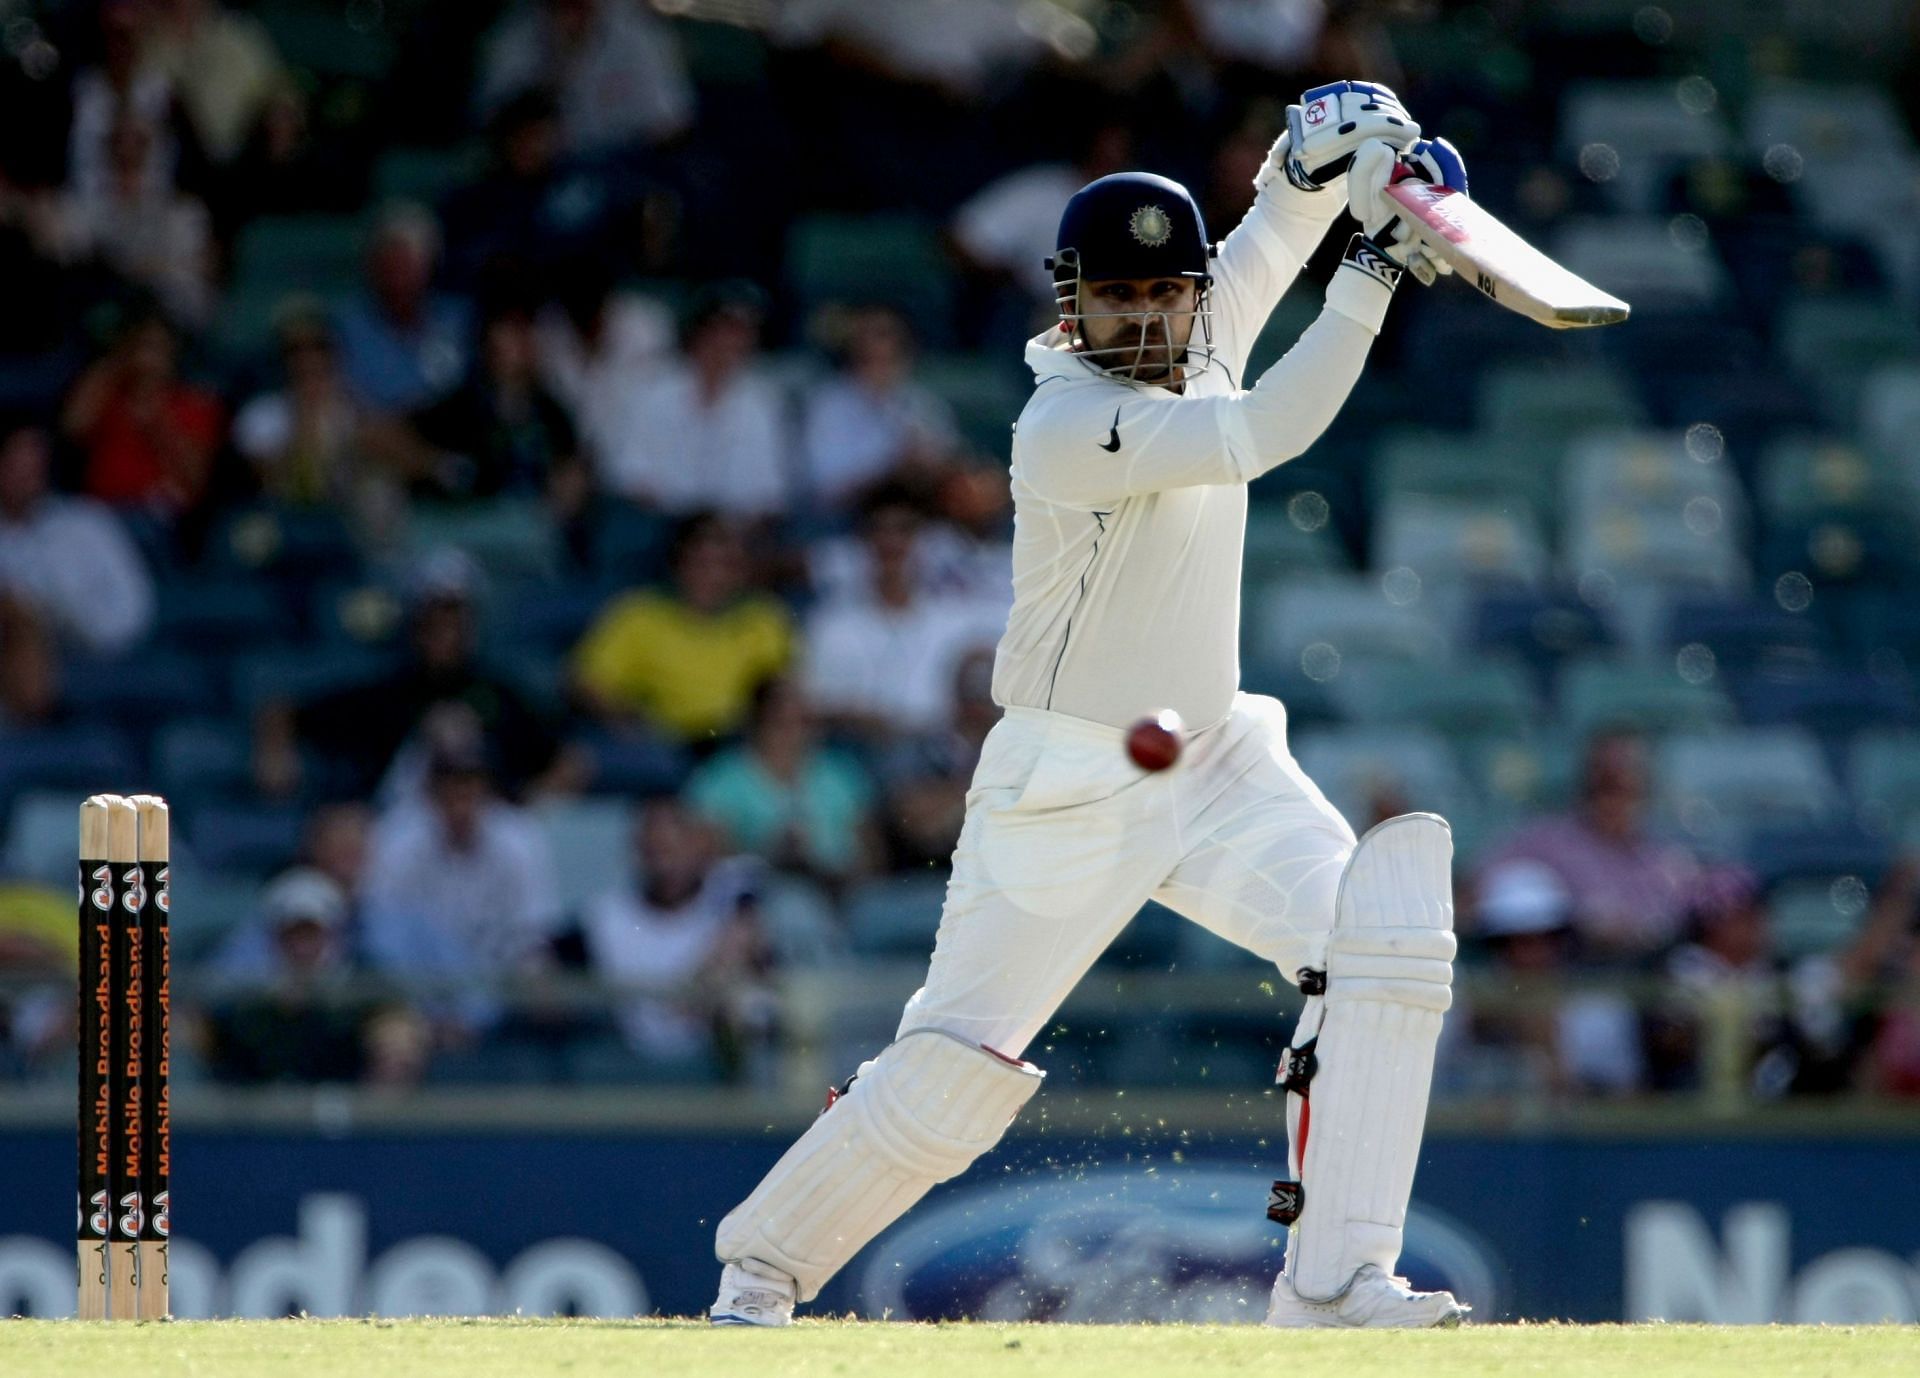 Virender Sehwag hammered 88 in the 2004 Kolkata Test versus South Africa. (Pic: Getty Images)